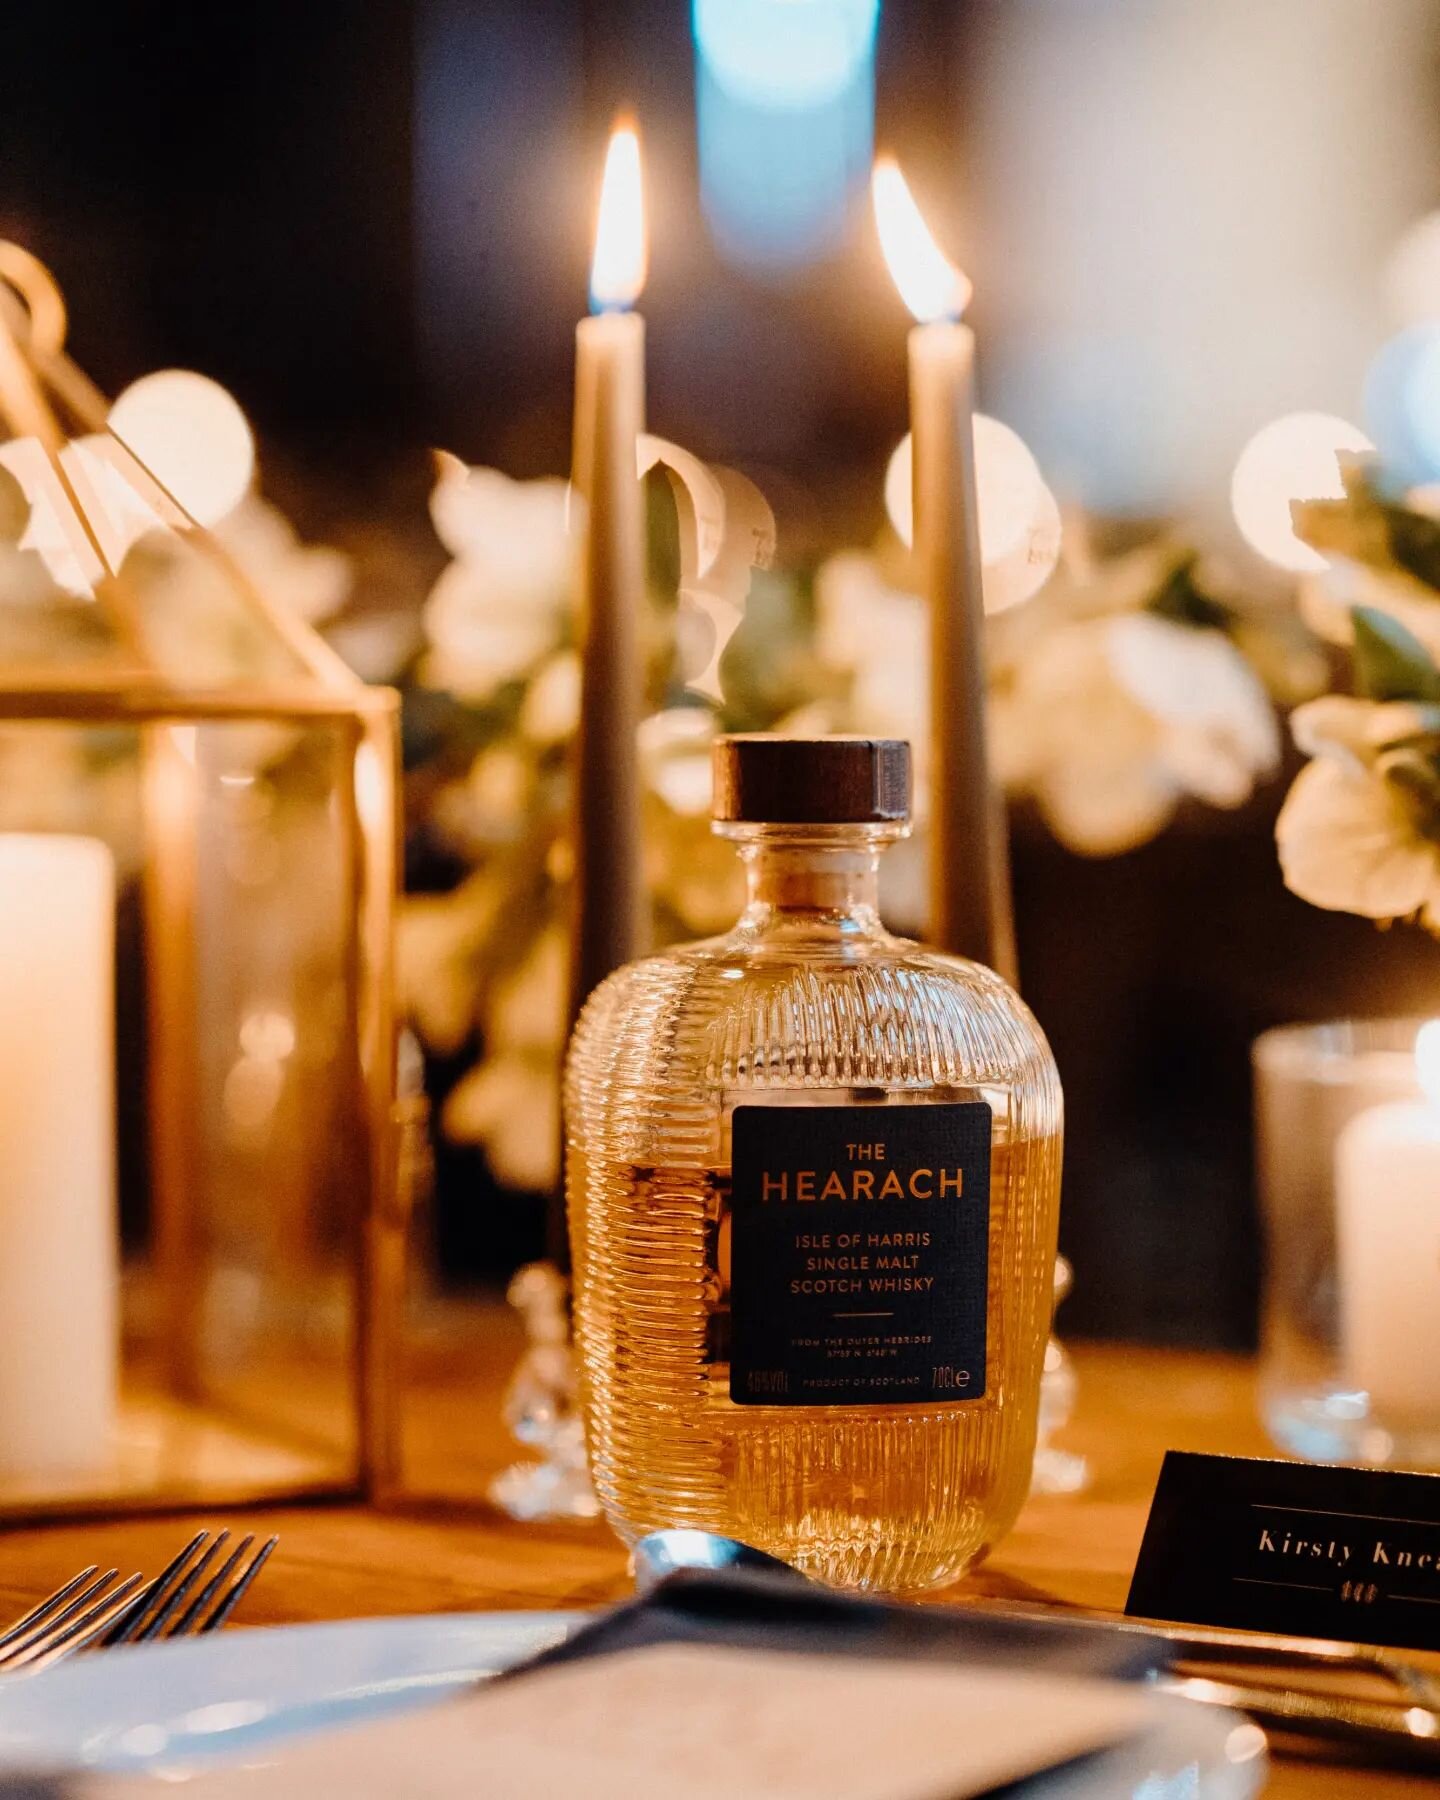 A moment please for this gorgeously cosy candlelit dinner table set up for Kirsty and Craig last month at @glasgowengineworks . Flowers by @littlebotanica. Stationery by the groom (@craigekneale) 

#engineworksglasgow #engineworkswedding #glasgowwedd